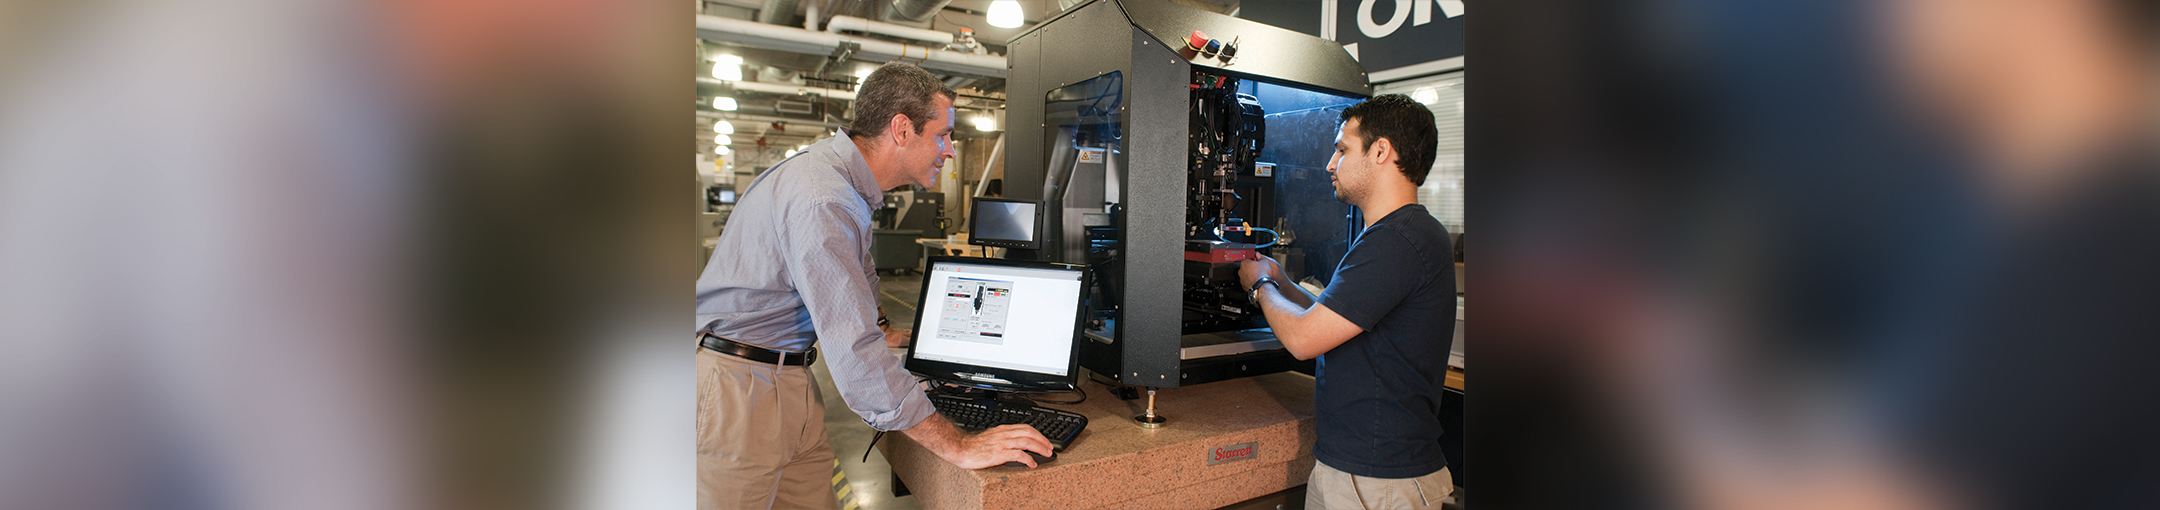 Denis standing over a laptop while peering into som 3d printer with another person working beside him